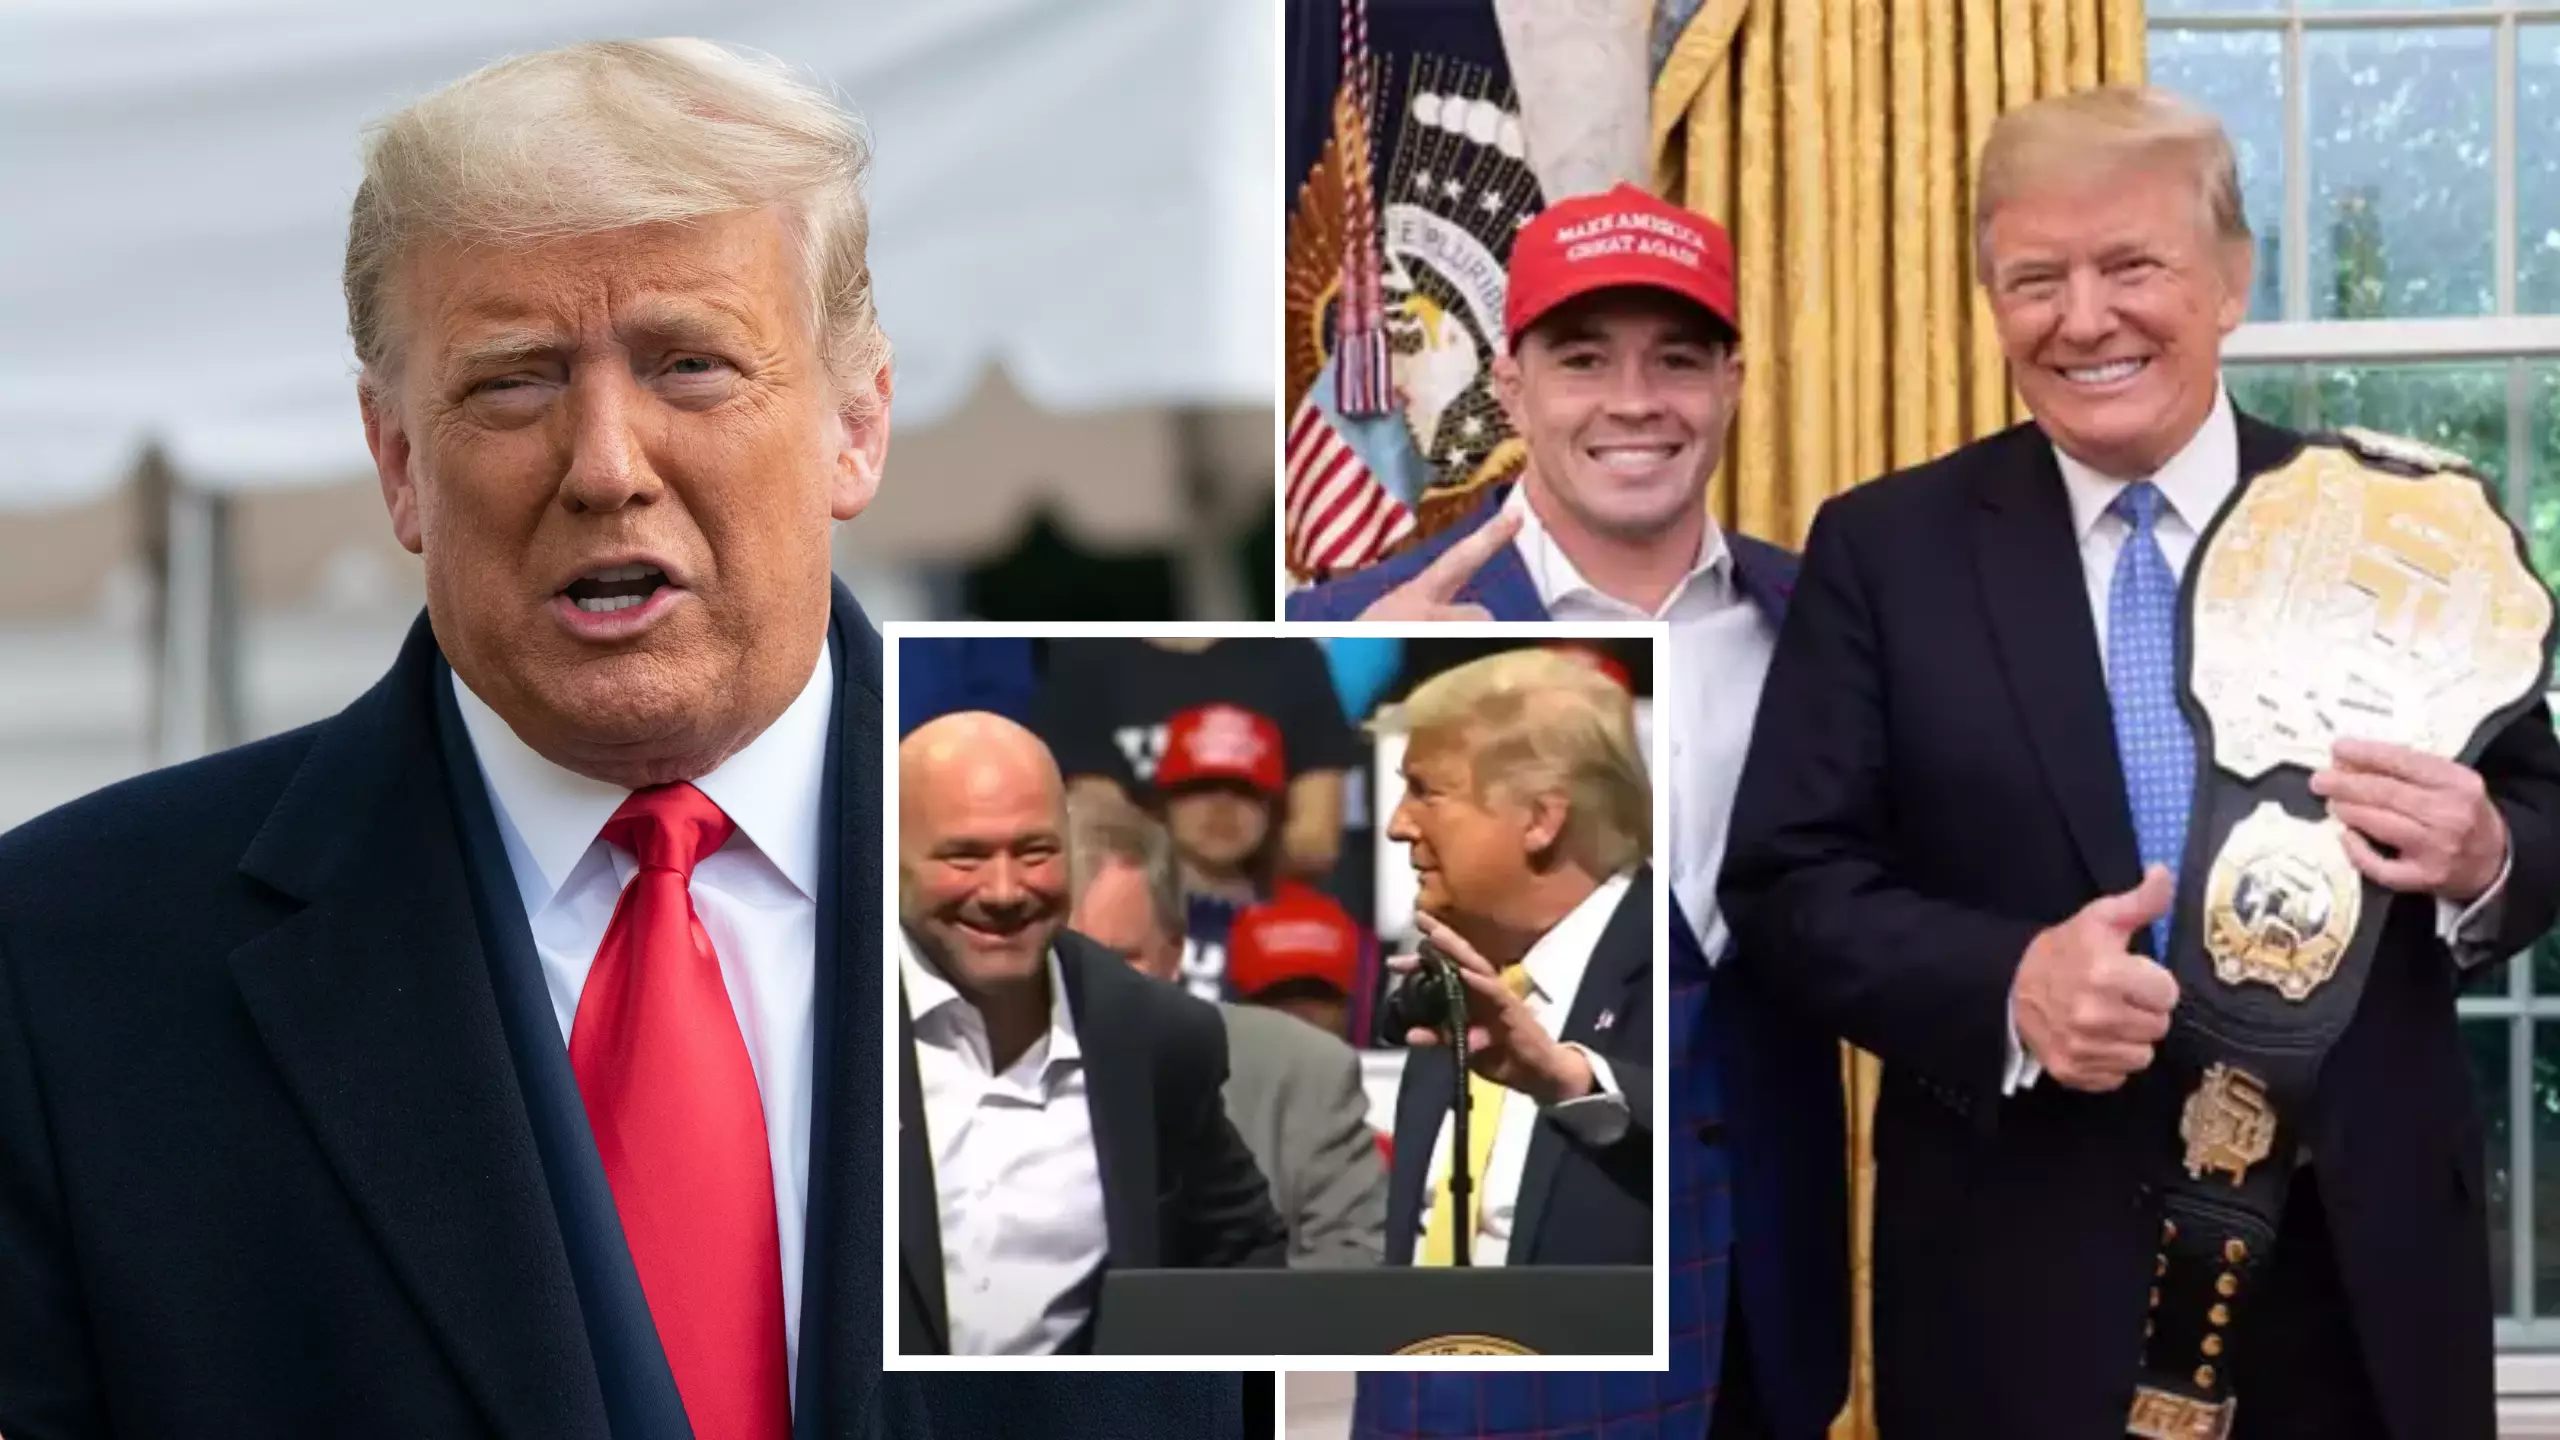 Donald Trump To Attend UFC 264 In Rare Public Appearance After Leaving Office